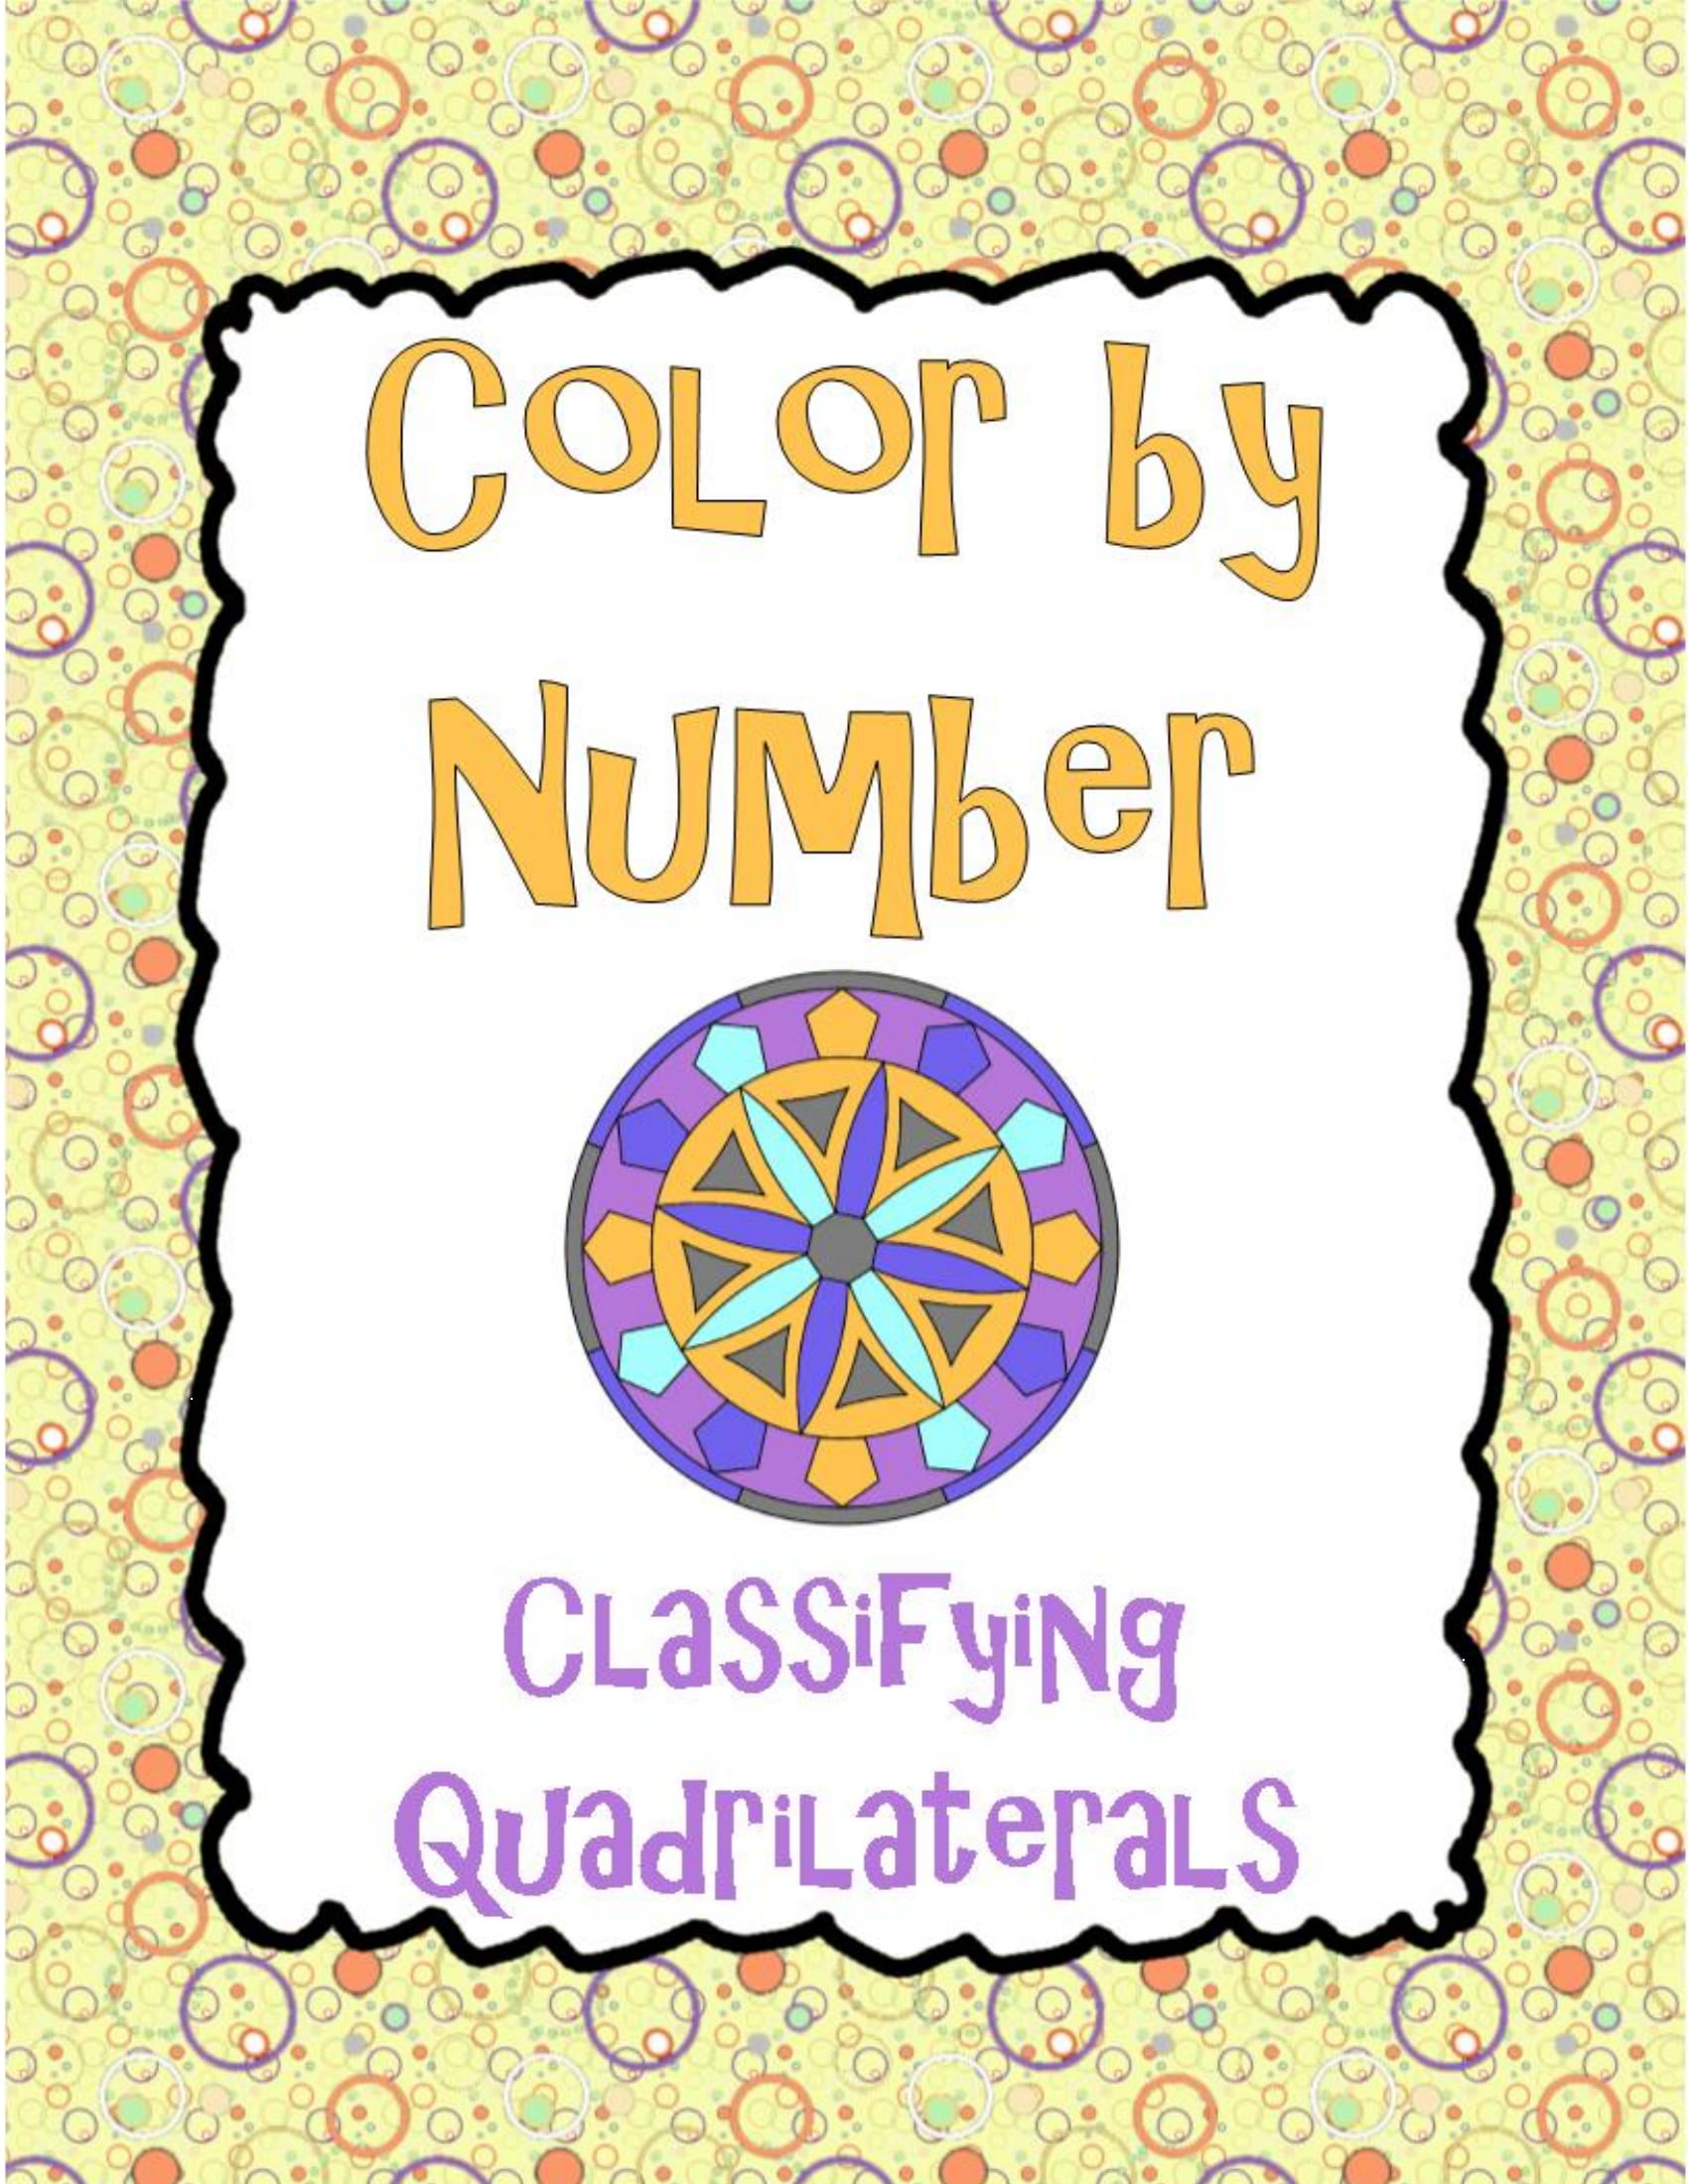 Classifying Quadrilaterals Color By Number 1 Funrithmetic